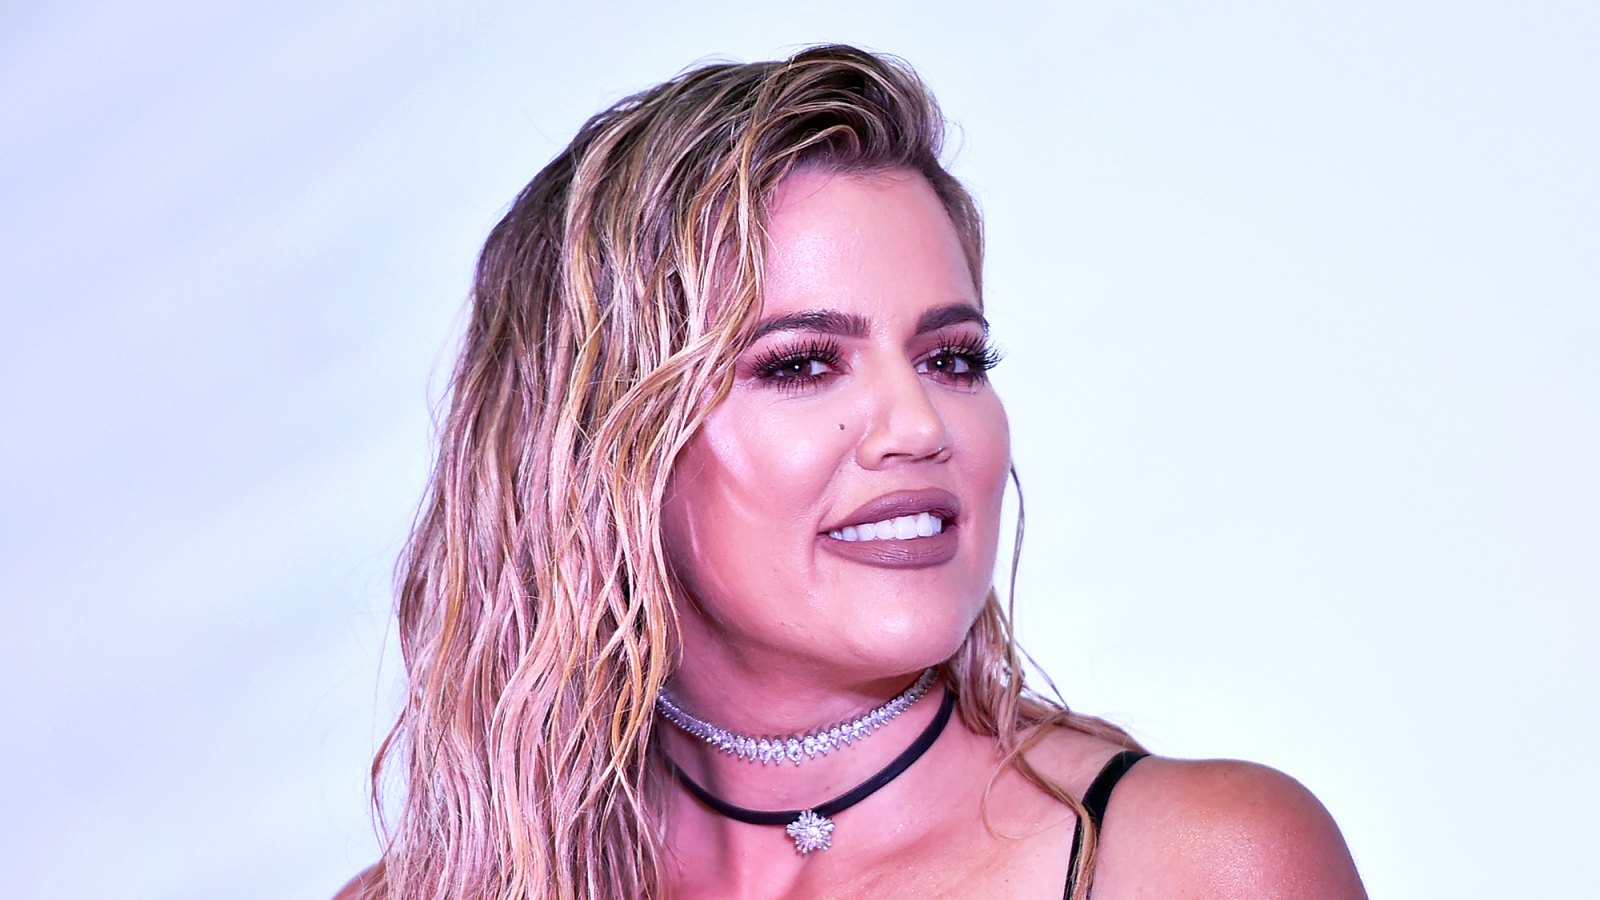 Khloe Kardashian speaks onstage at the 2016 Good American Launch event at the Grove in Los Angeles, California.